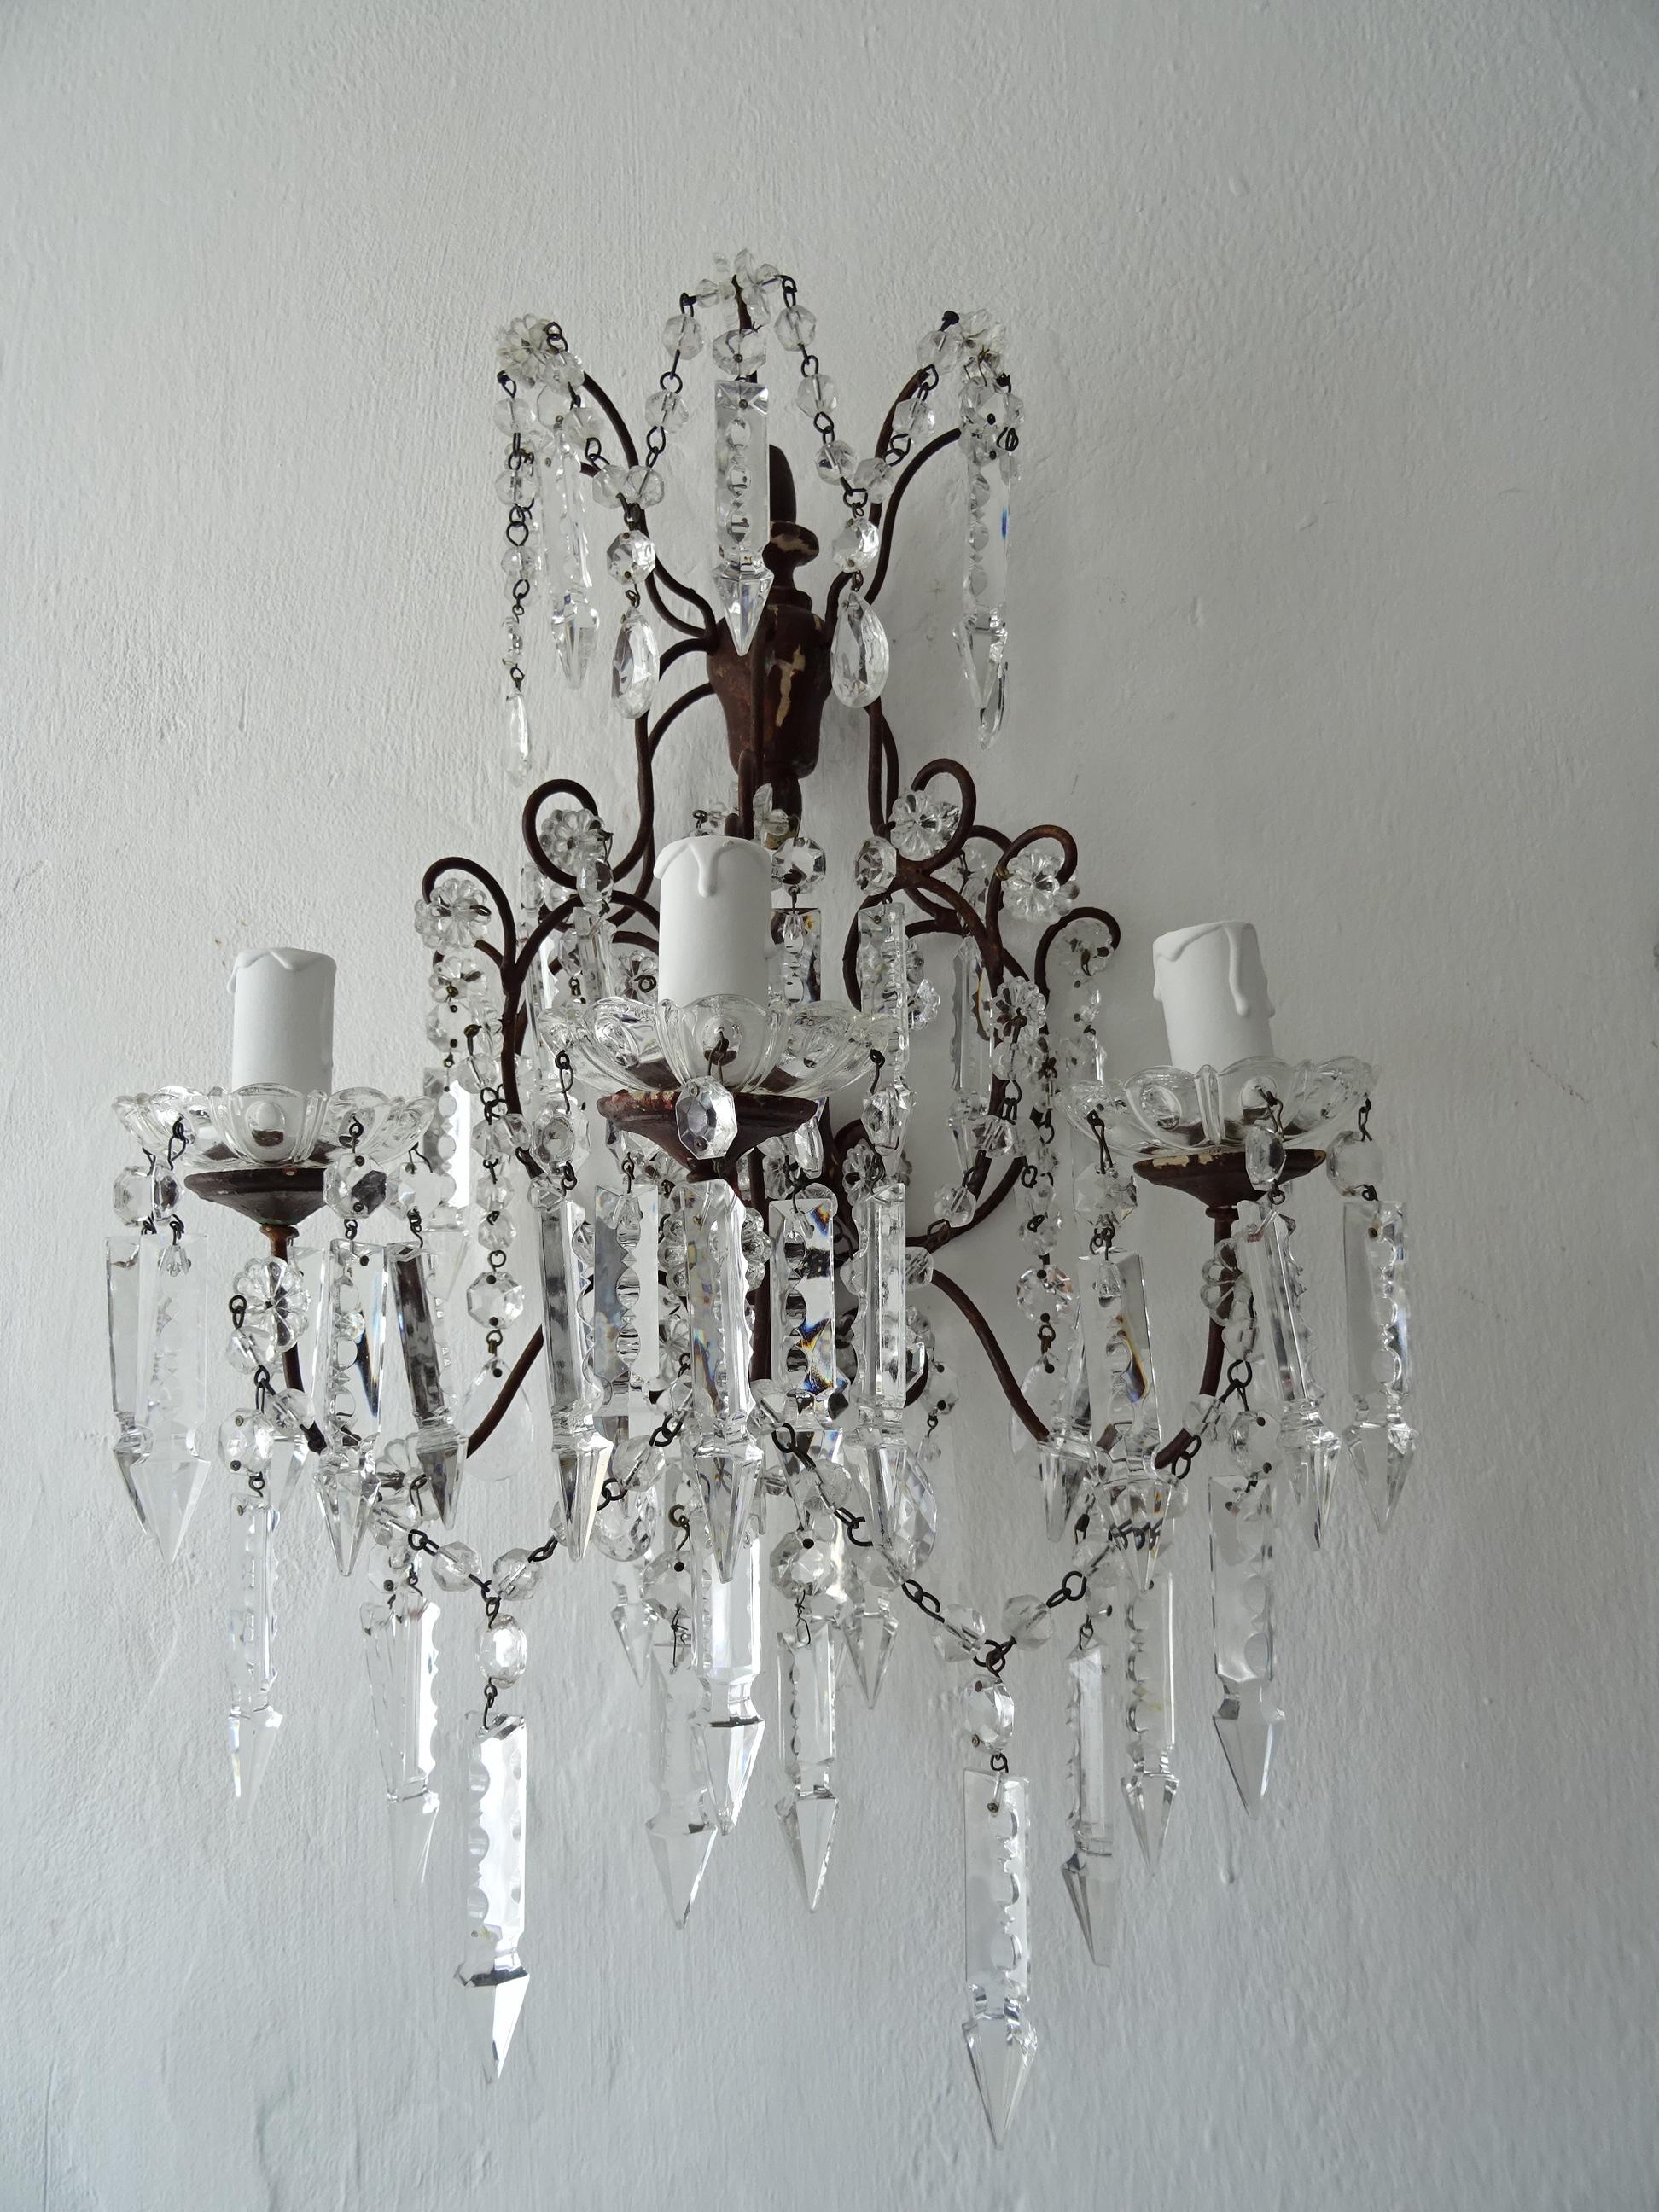 Early 20th Century Big French Baroque Loaded Crystal Spears Prisms 3 Light  Sconces c 1900 For Sale